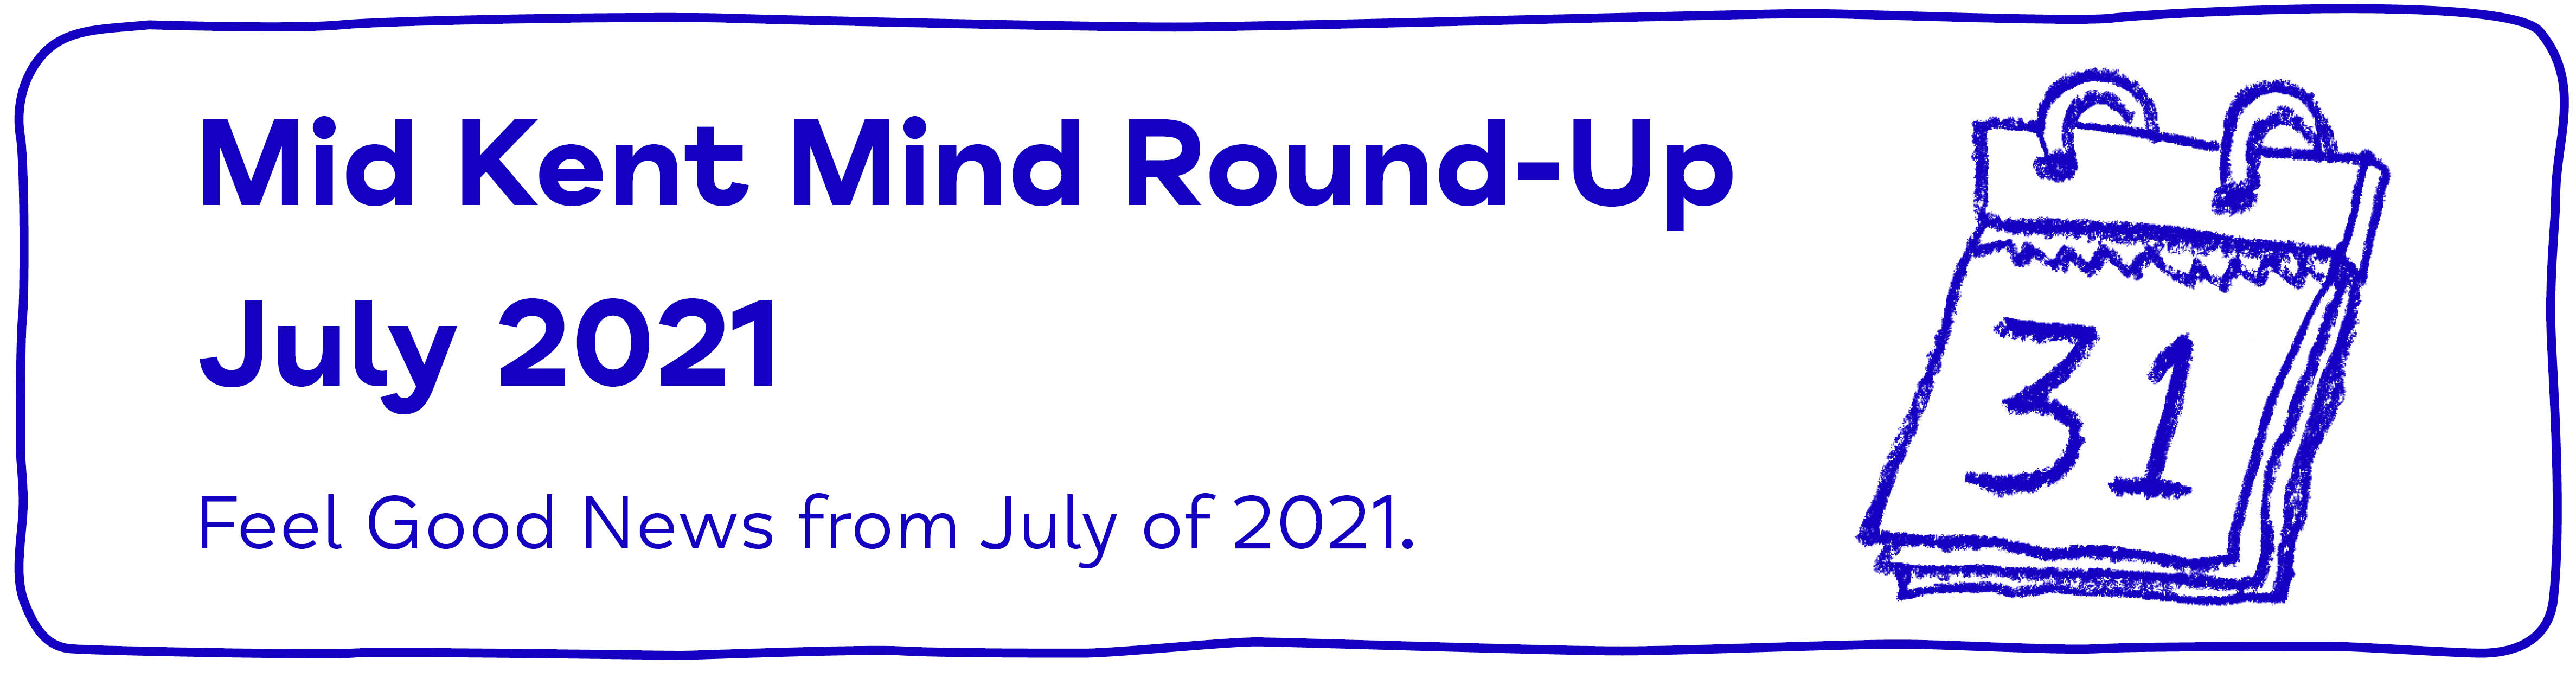 Mid Kent Mind Round-Up July 2021 Feel Good News from July of 2021 - Mid Kent Mind Newsletter - July 2021